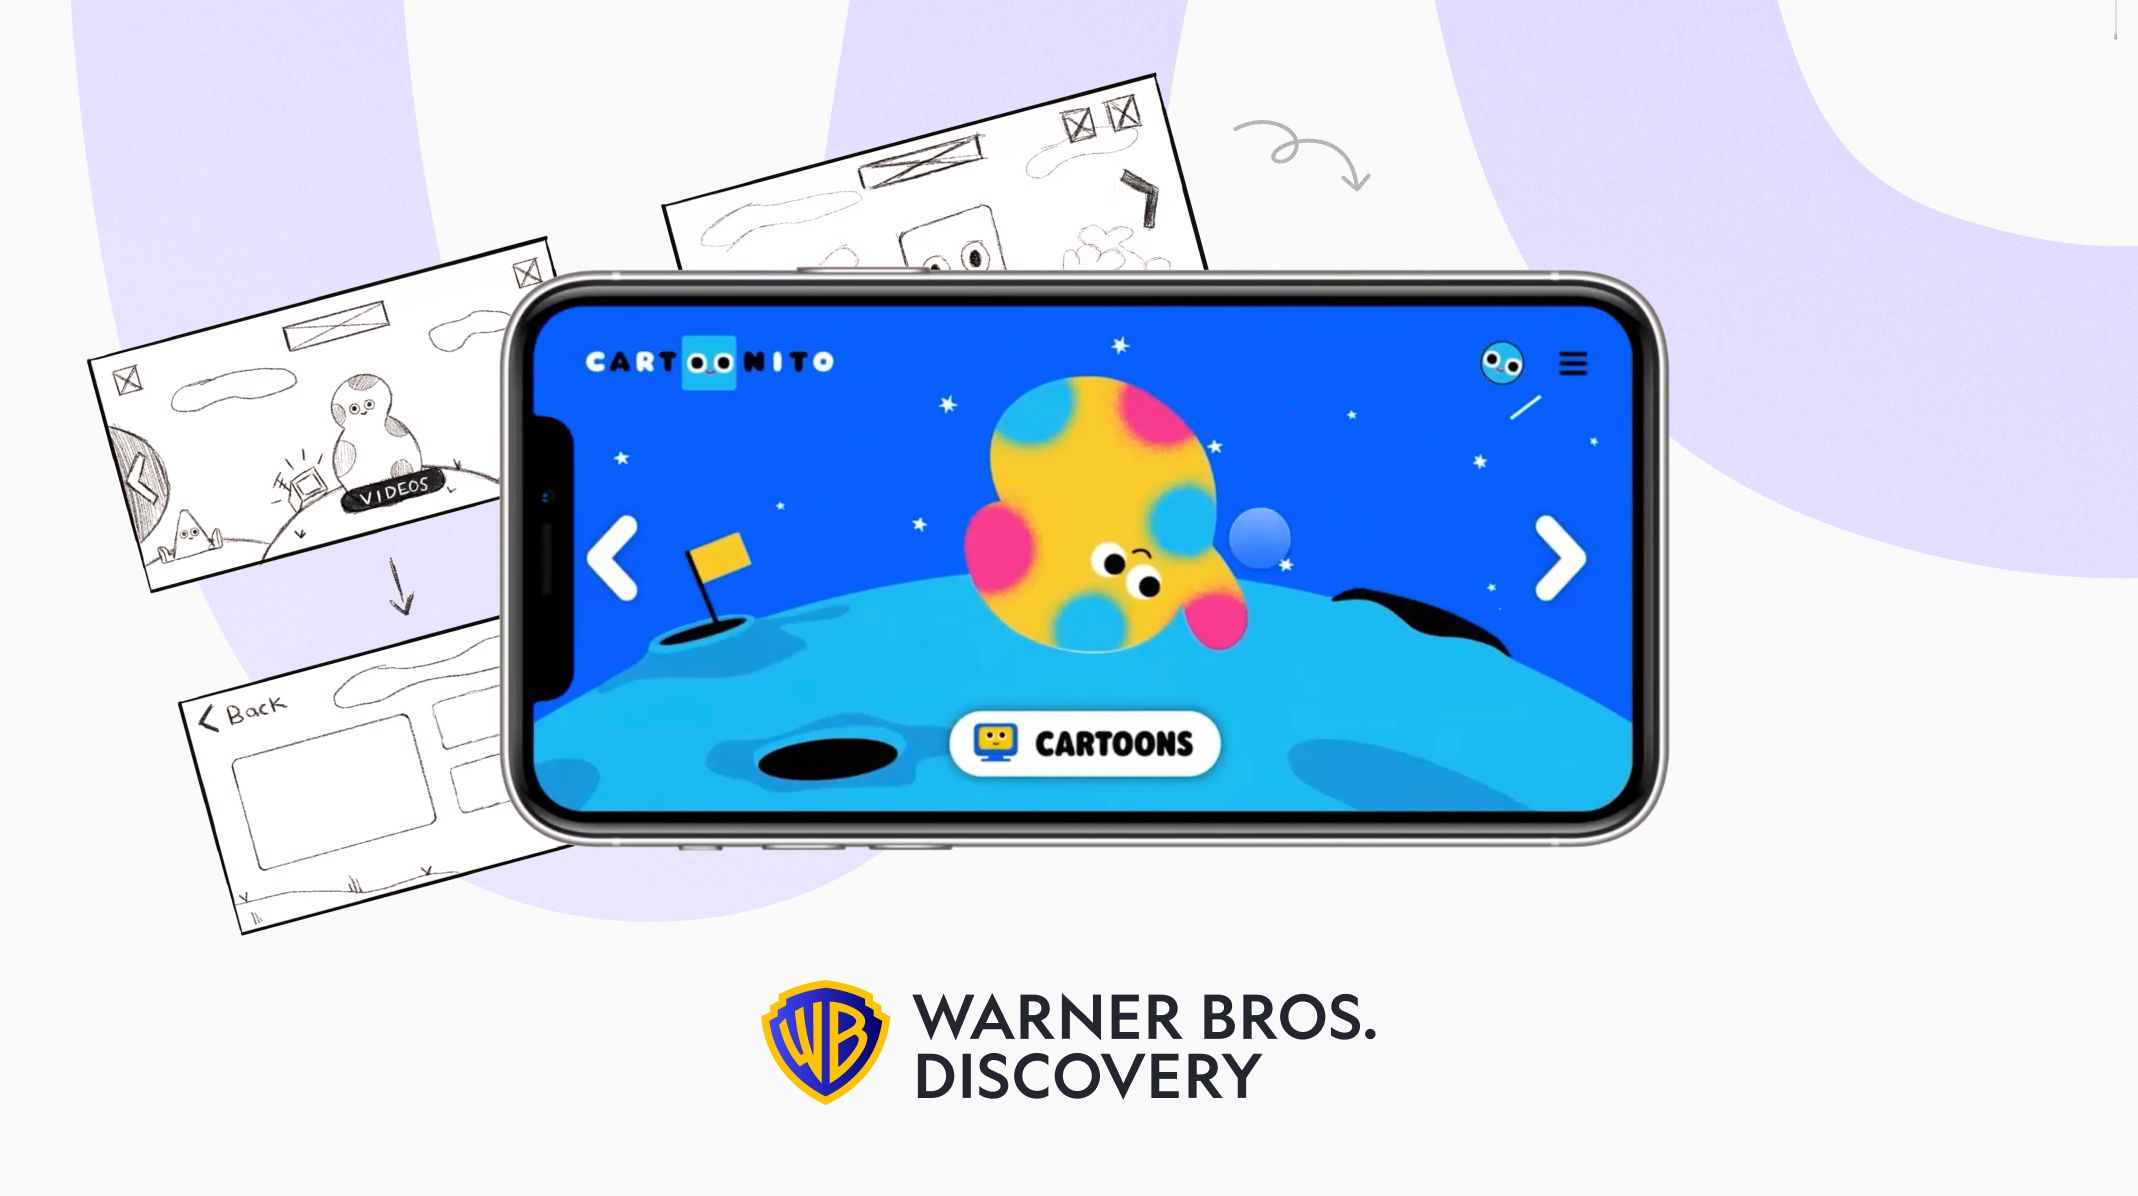 How Warner Bros. Discovery Uses ProtoPie for Product Innovation & Motion Design